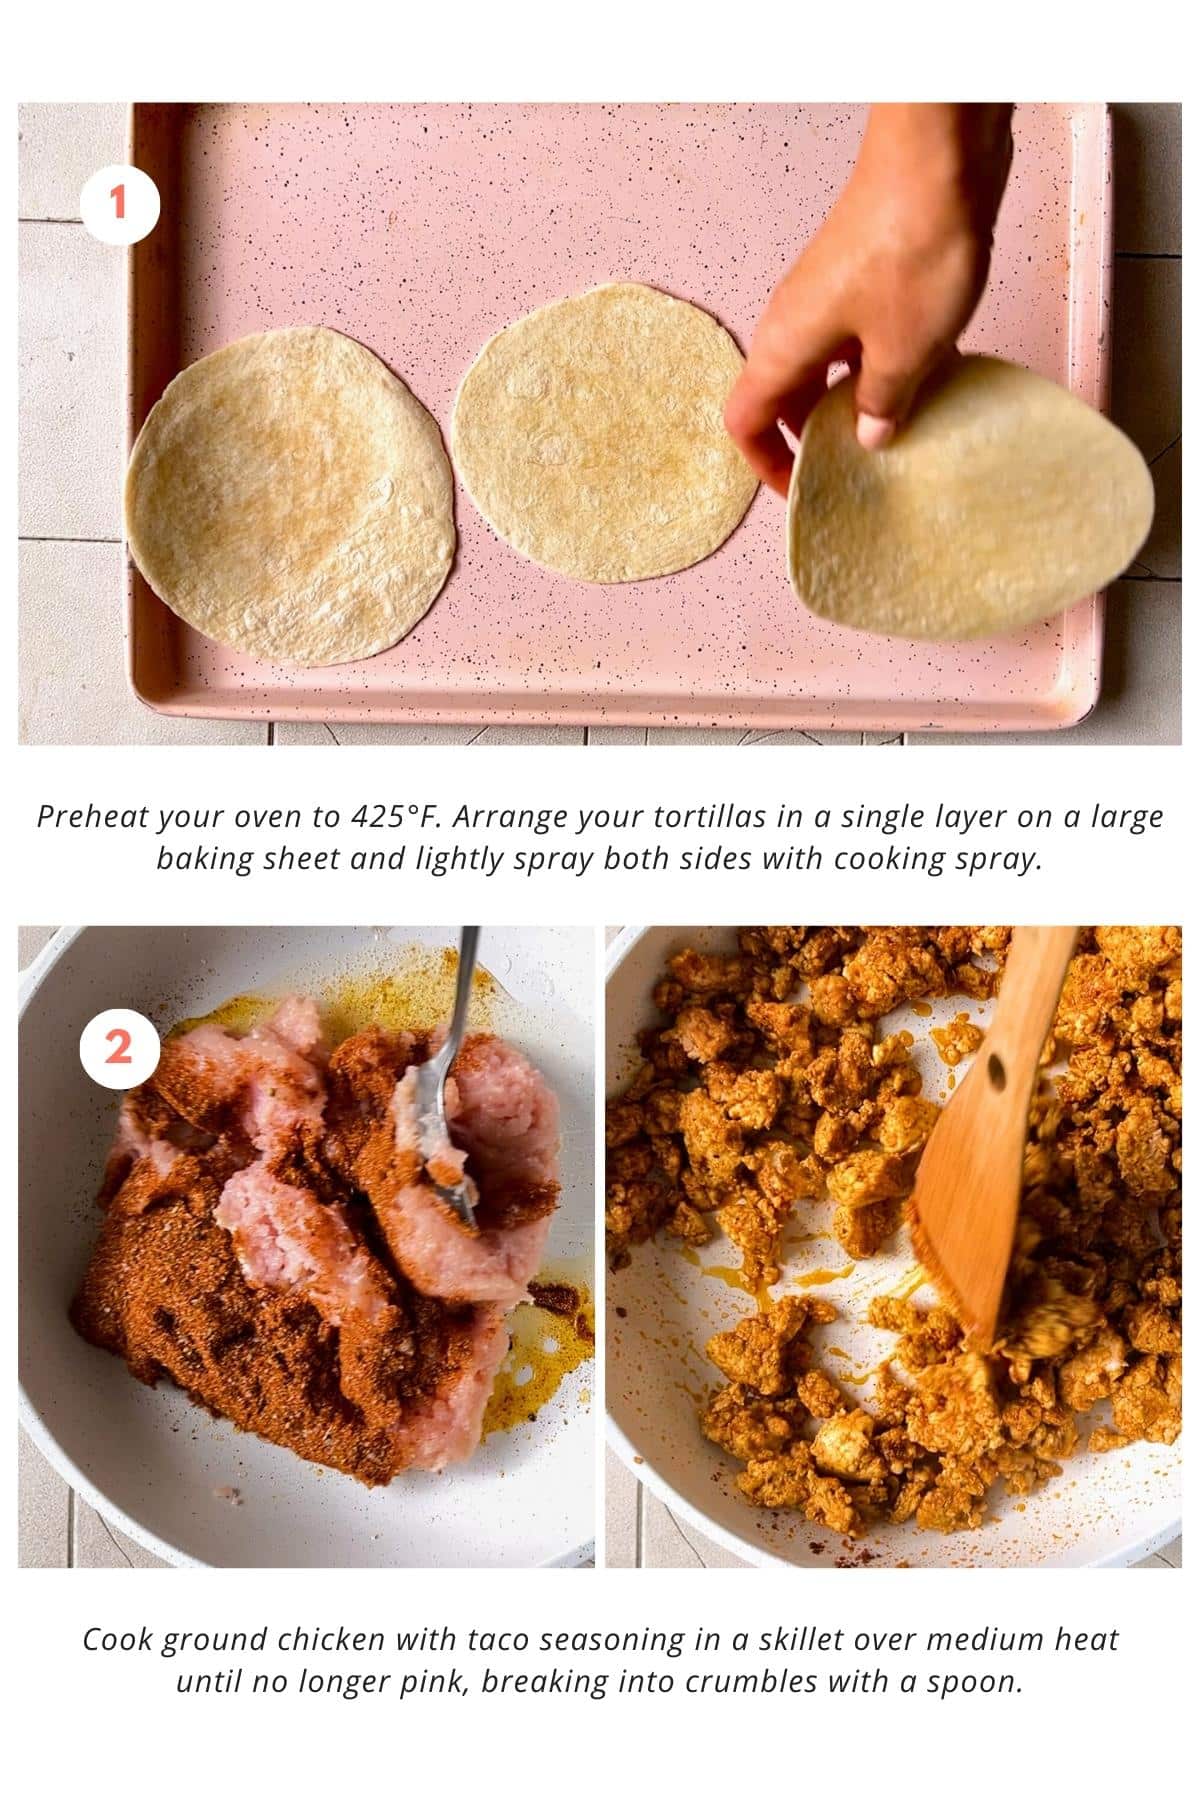 Tortillas arranged in a single layer on a baking sheet, lightly sprayed with cooking spray. Ground chicken cooked with taco seasoning in a skillet until no longer pink.